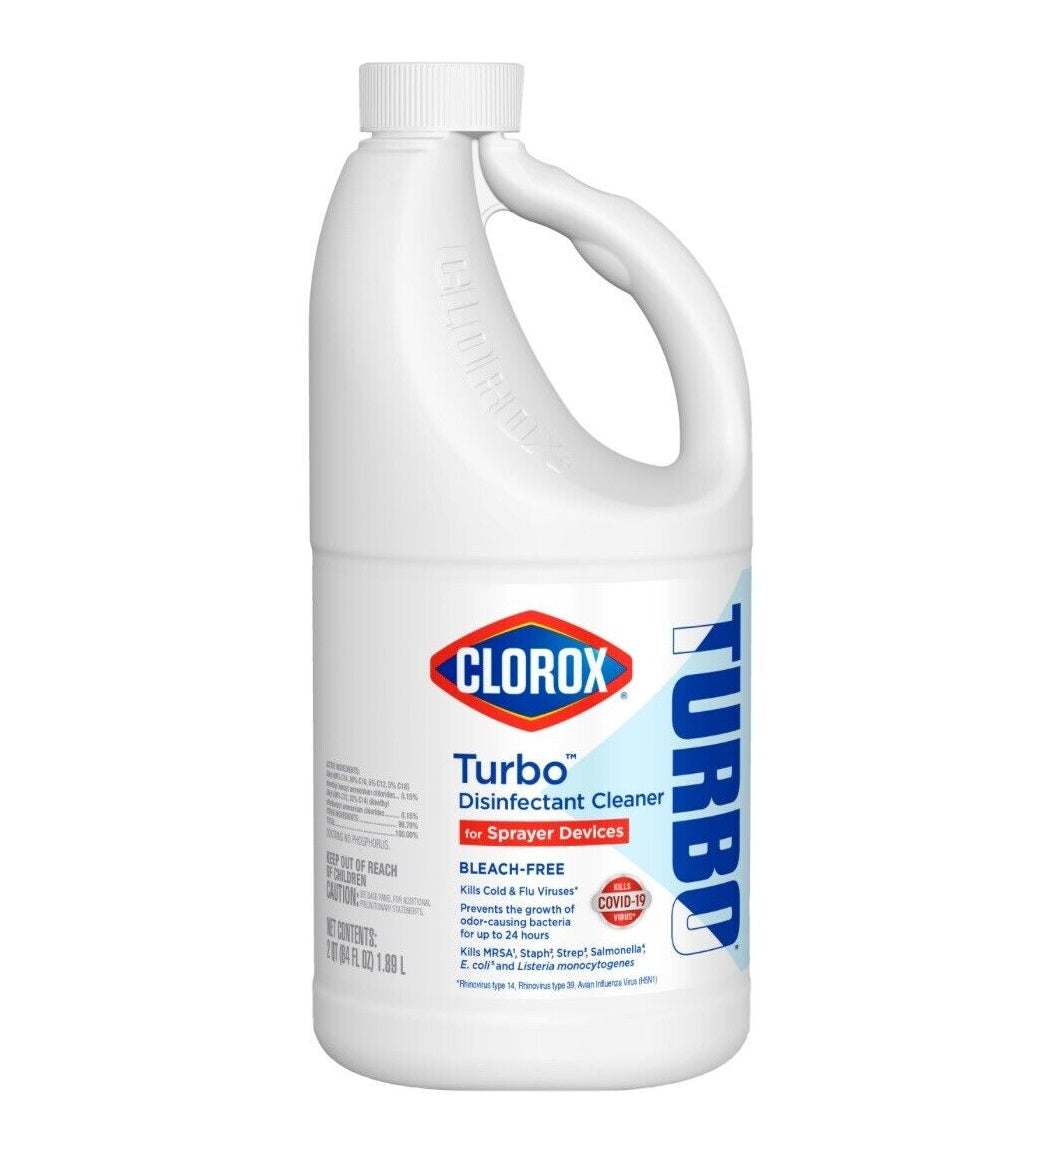 Clorox Turbo Disinfectant Cleaner for Sprayer Devices - 64oz/8pk